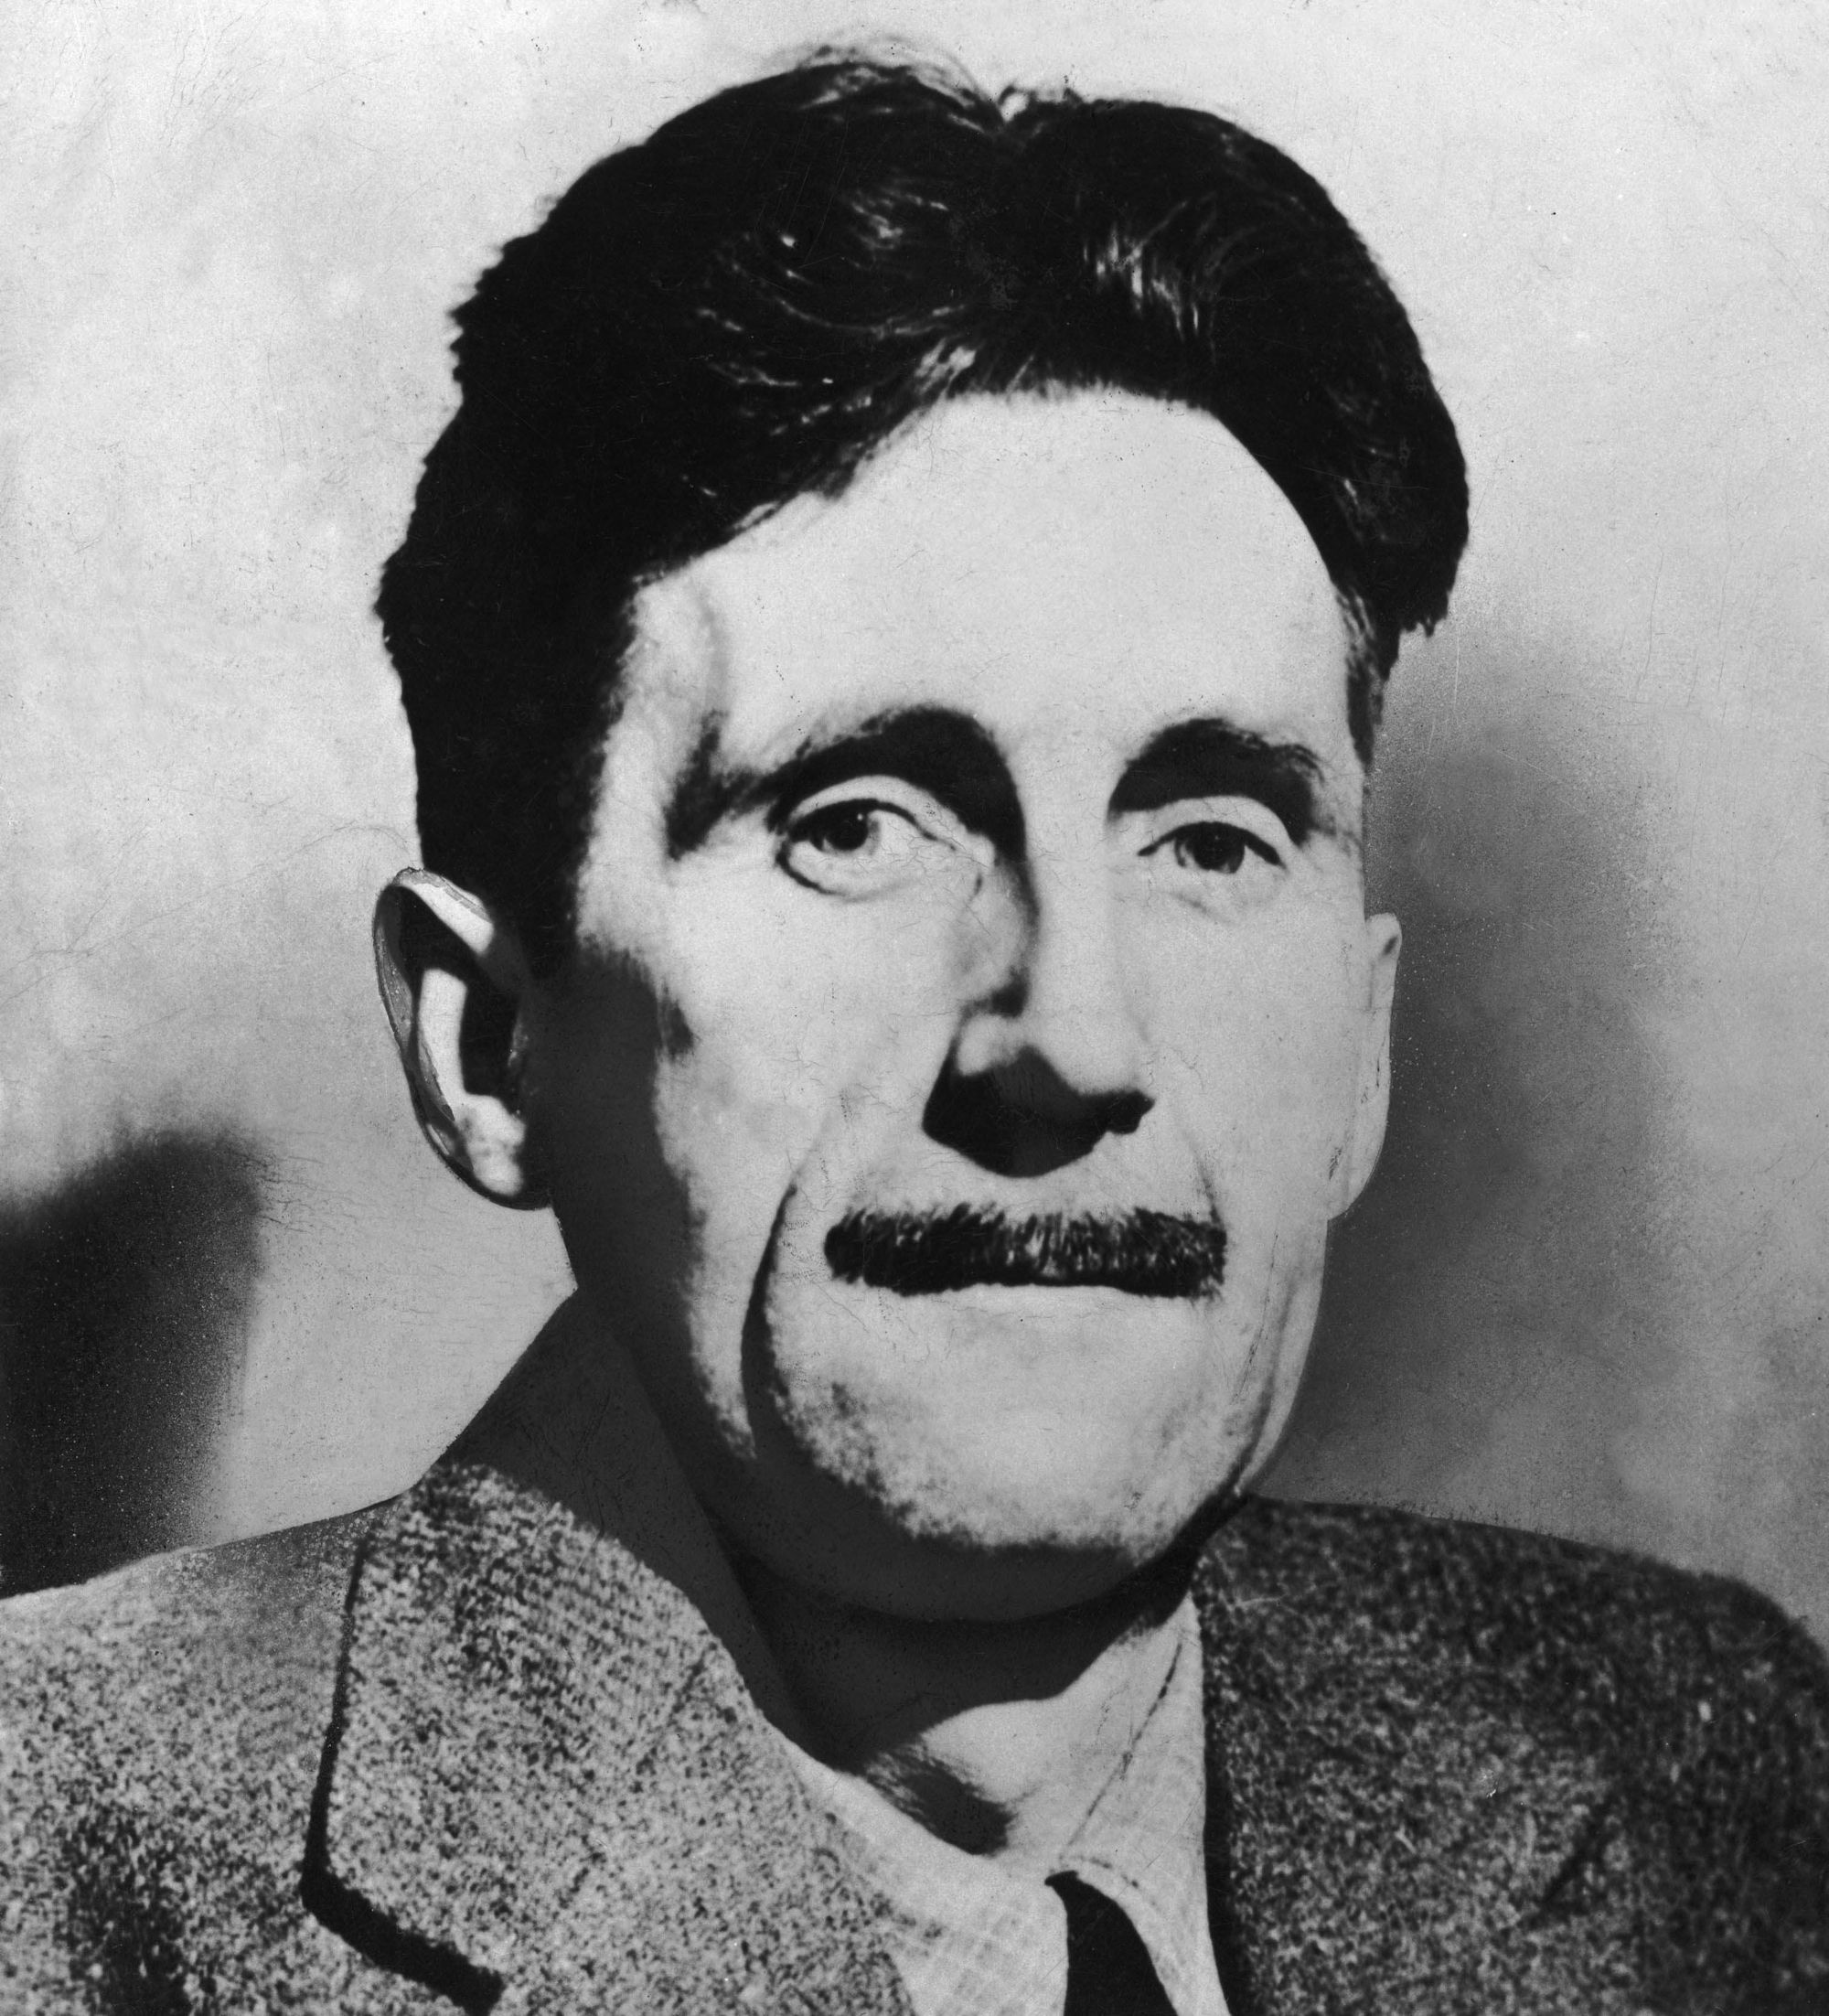 george orwell's face